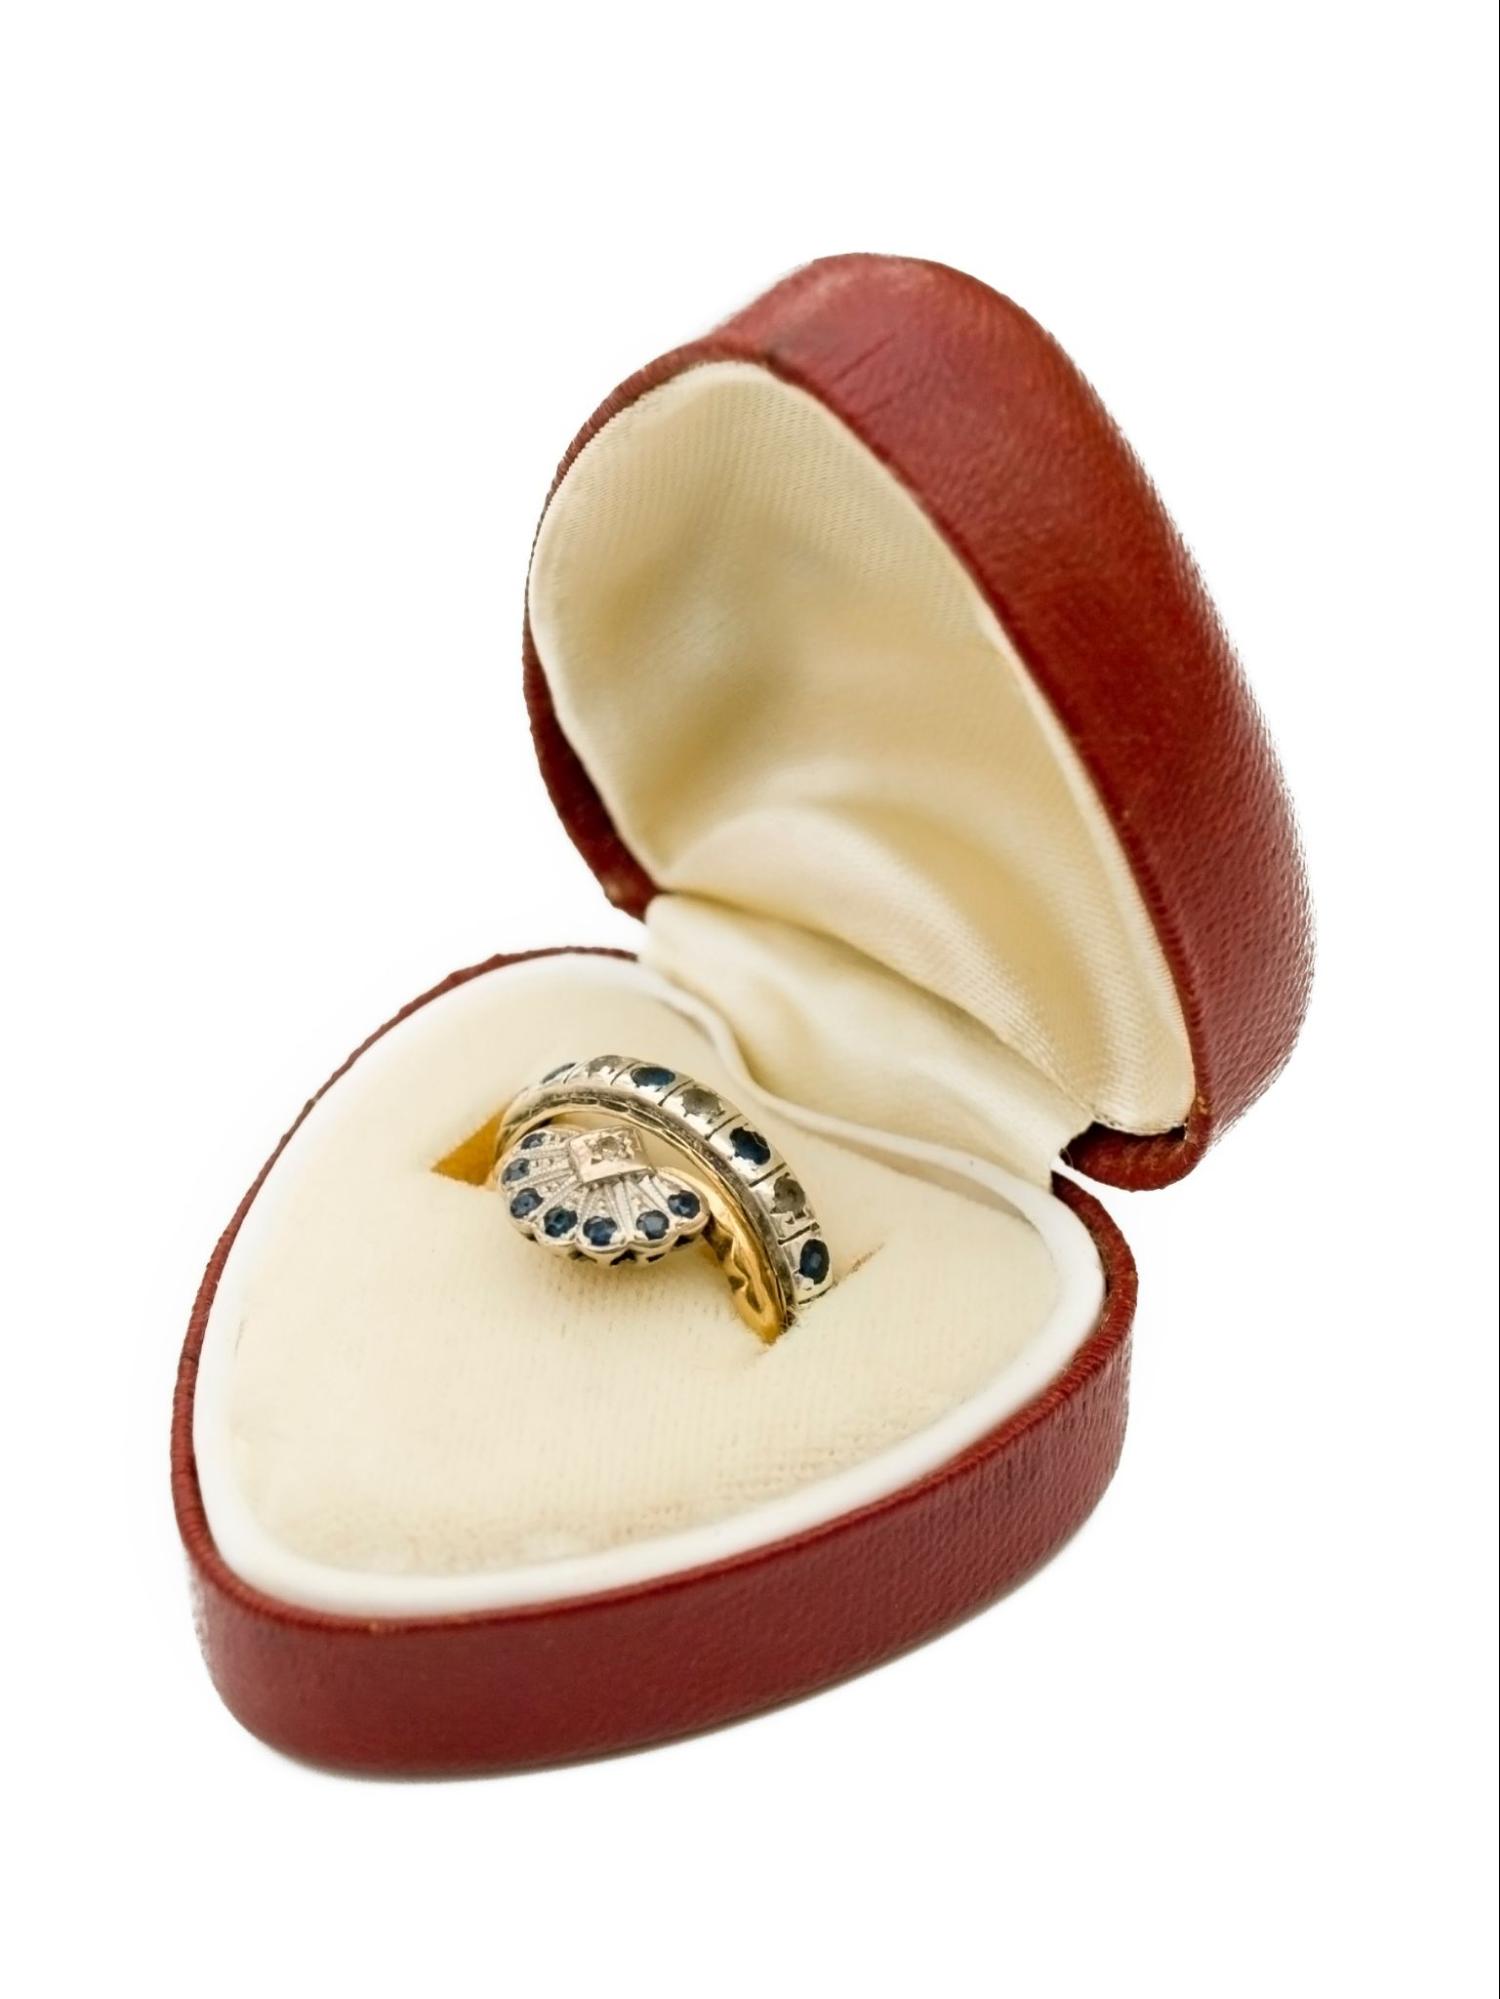 A ring box is open with a sapphire-studded vintage wedding band inside